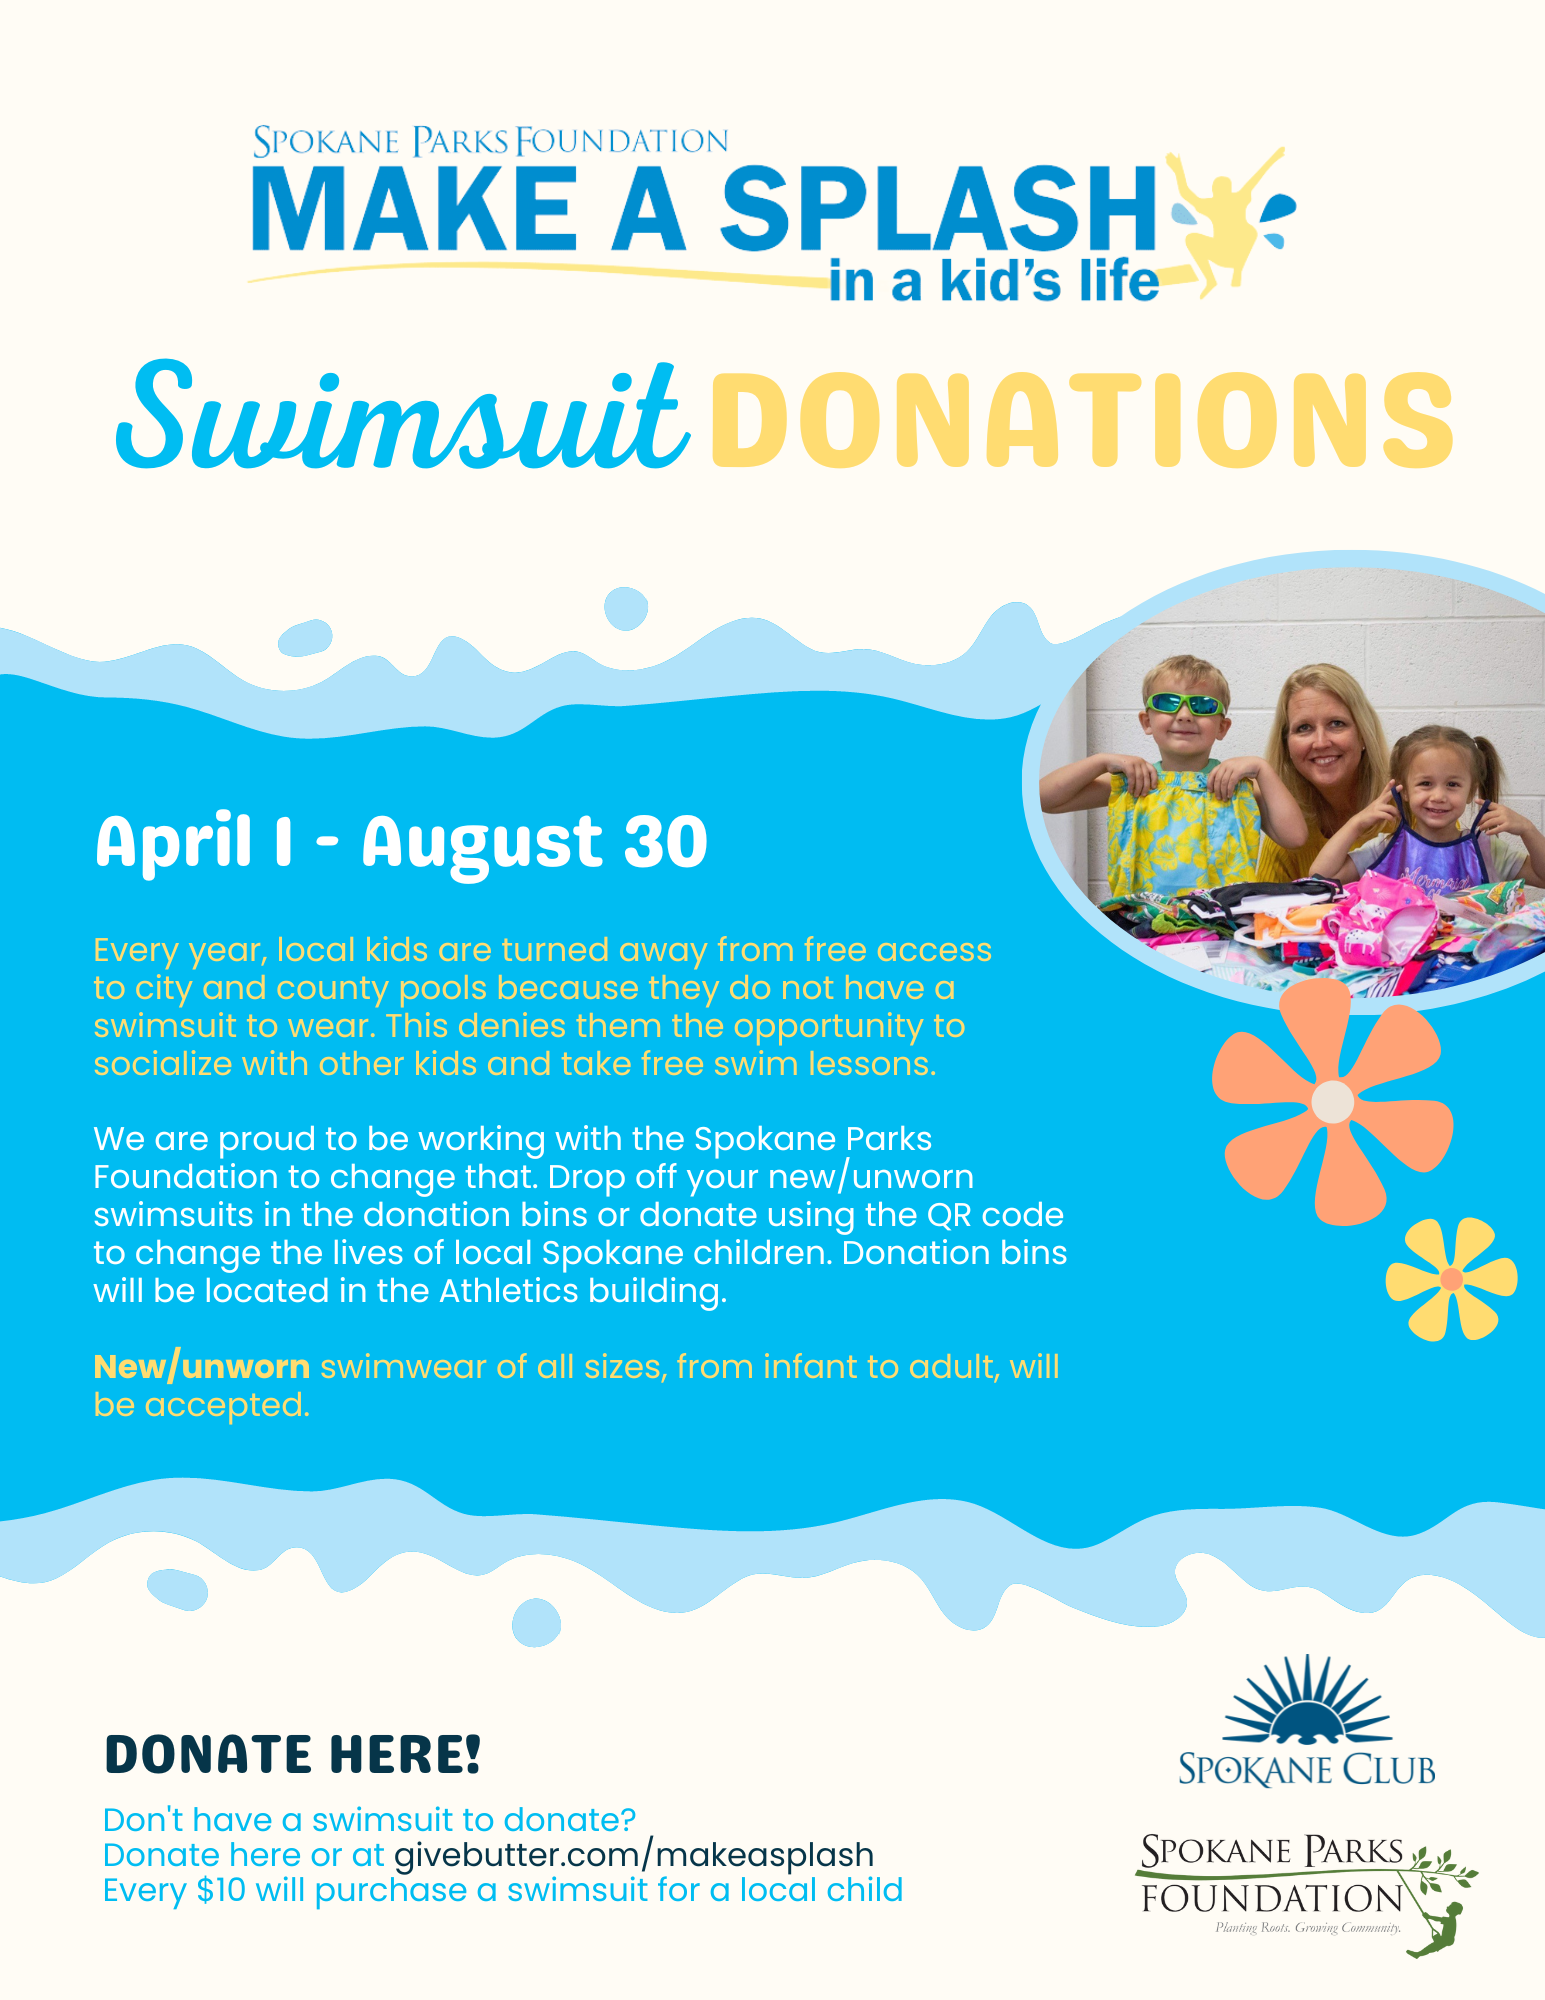 A Spokane Club poster shows details on the make a splash initiative to collect swimsuit donations for local children.